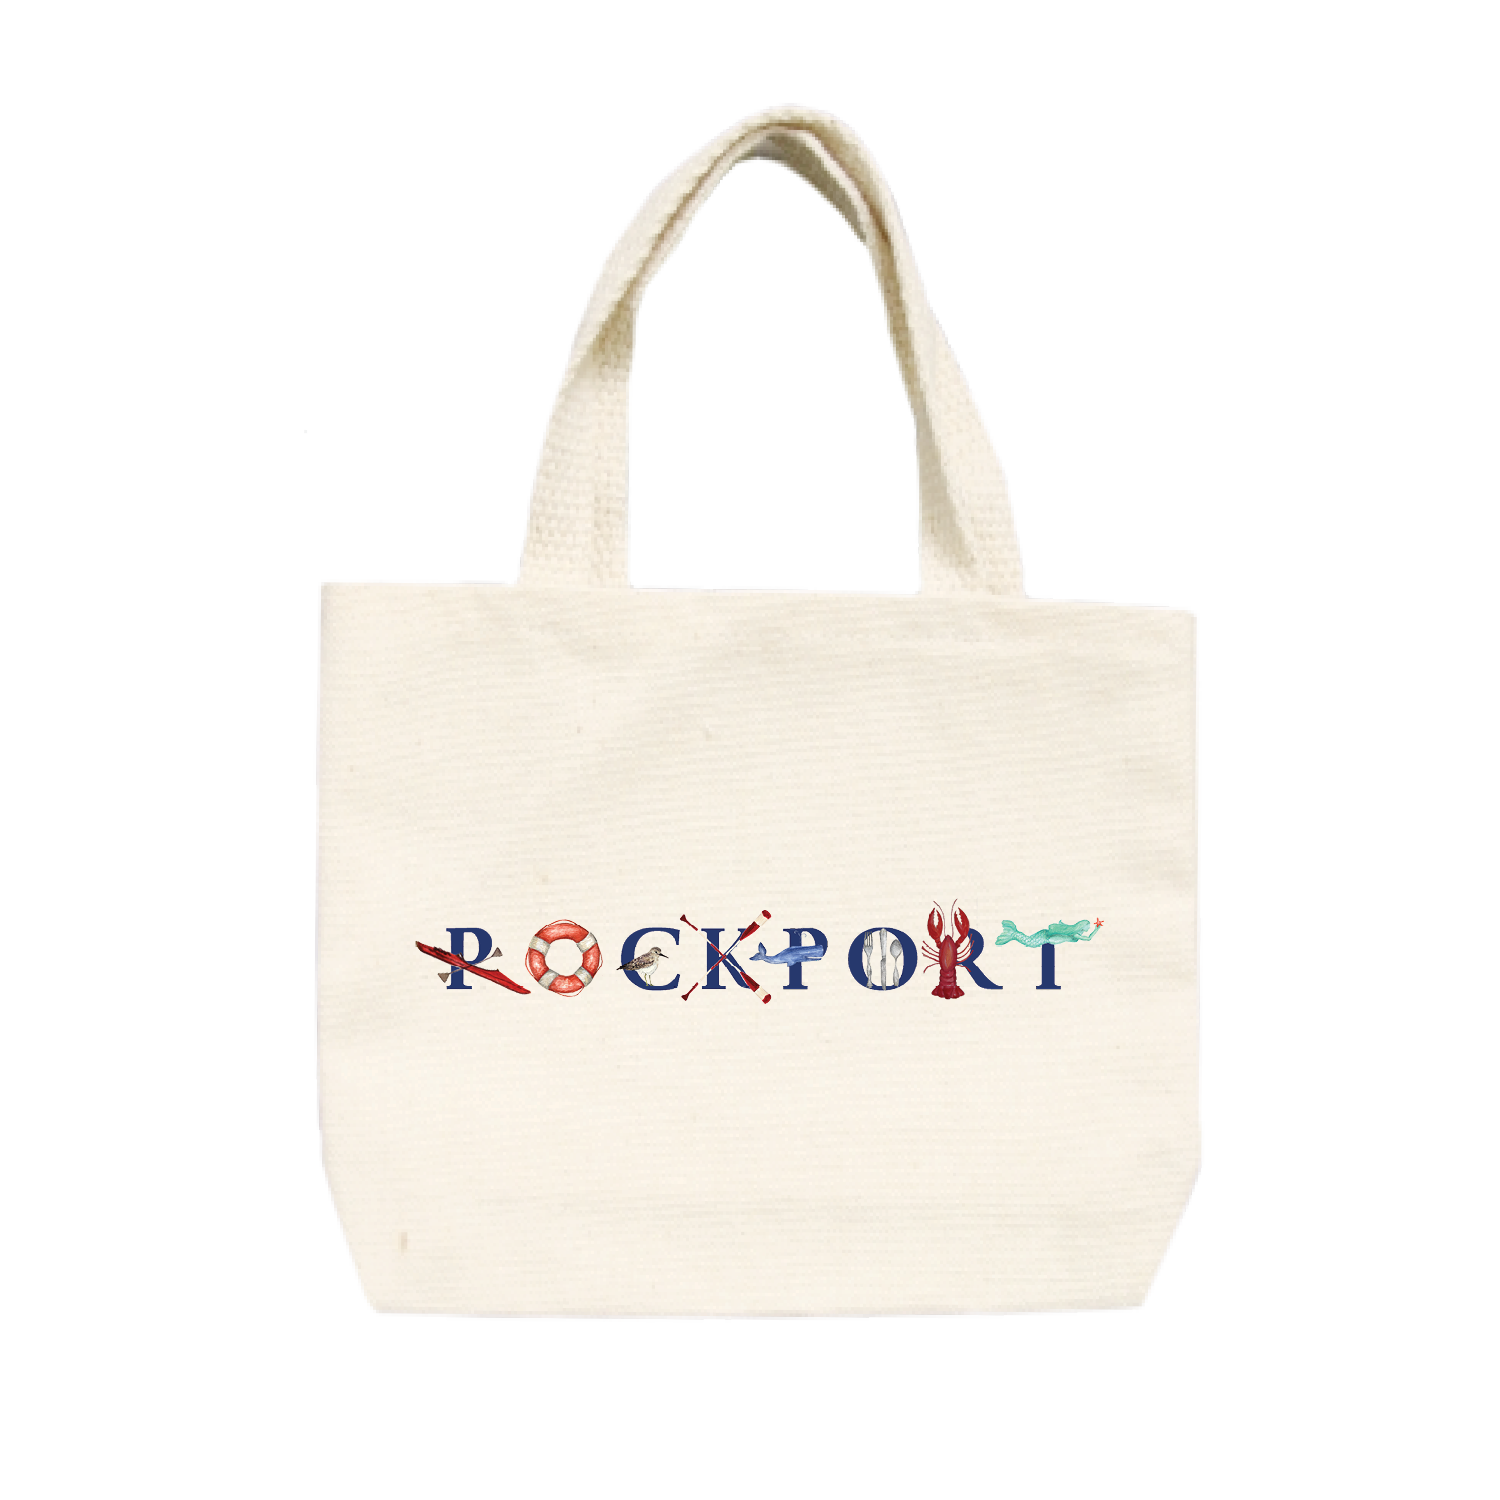 Rockport small tote